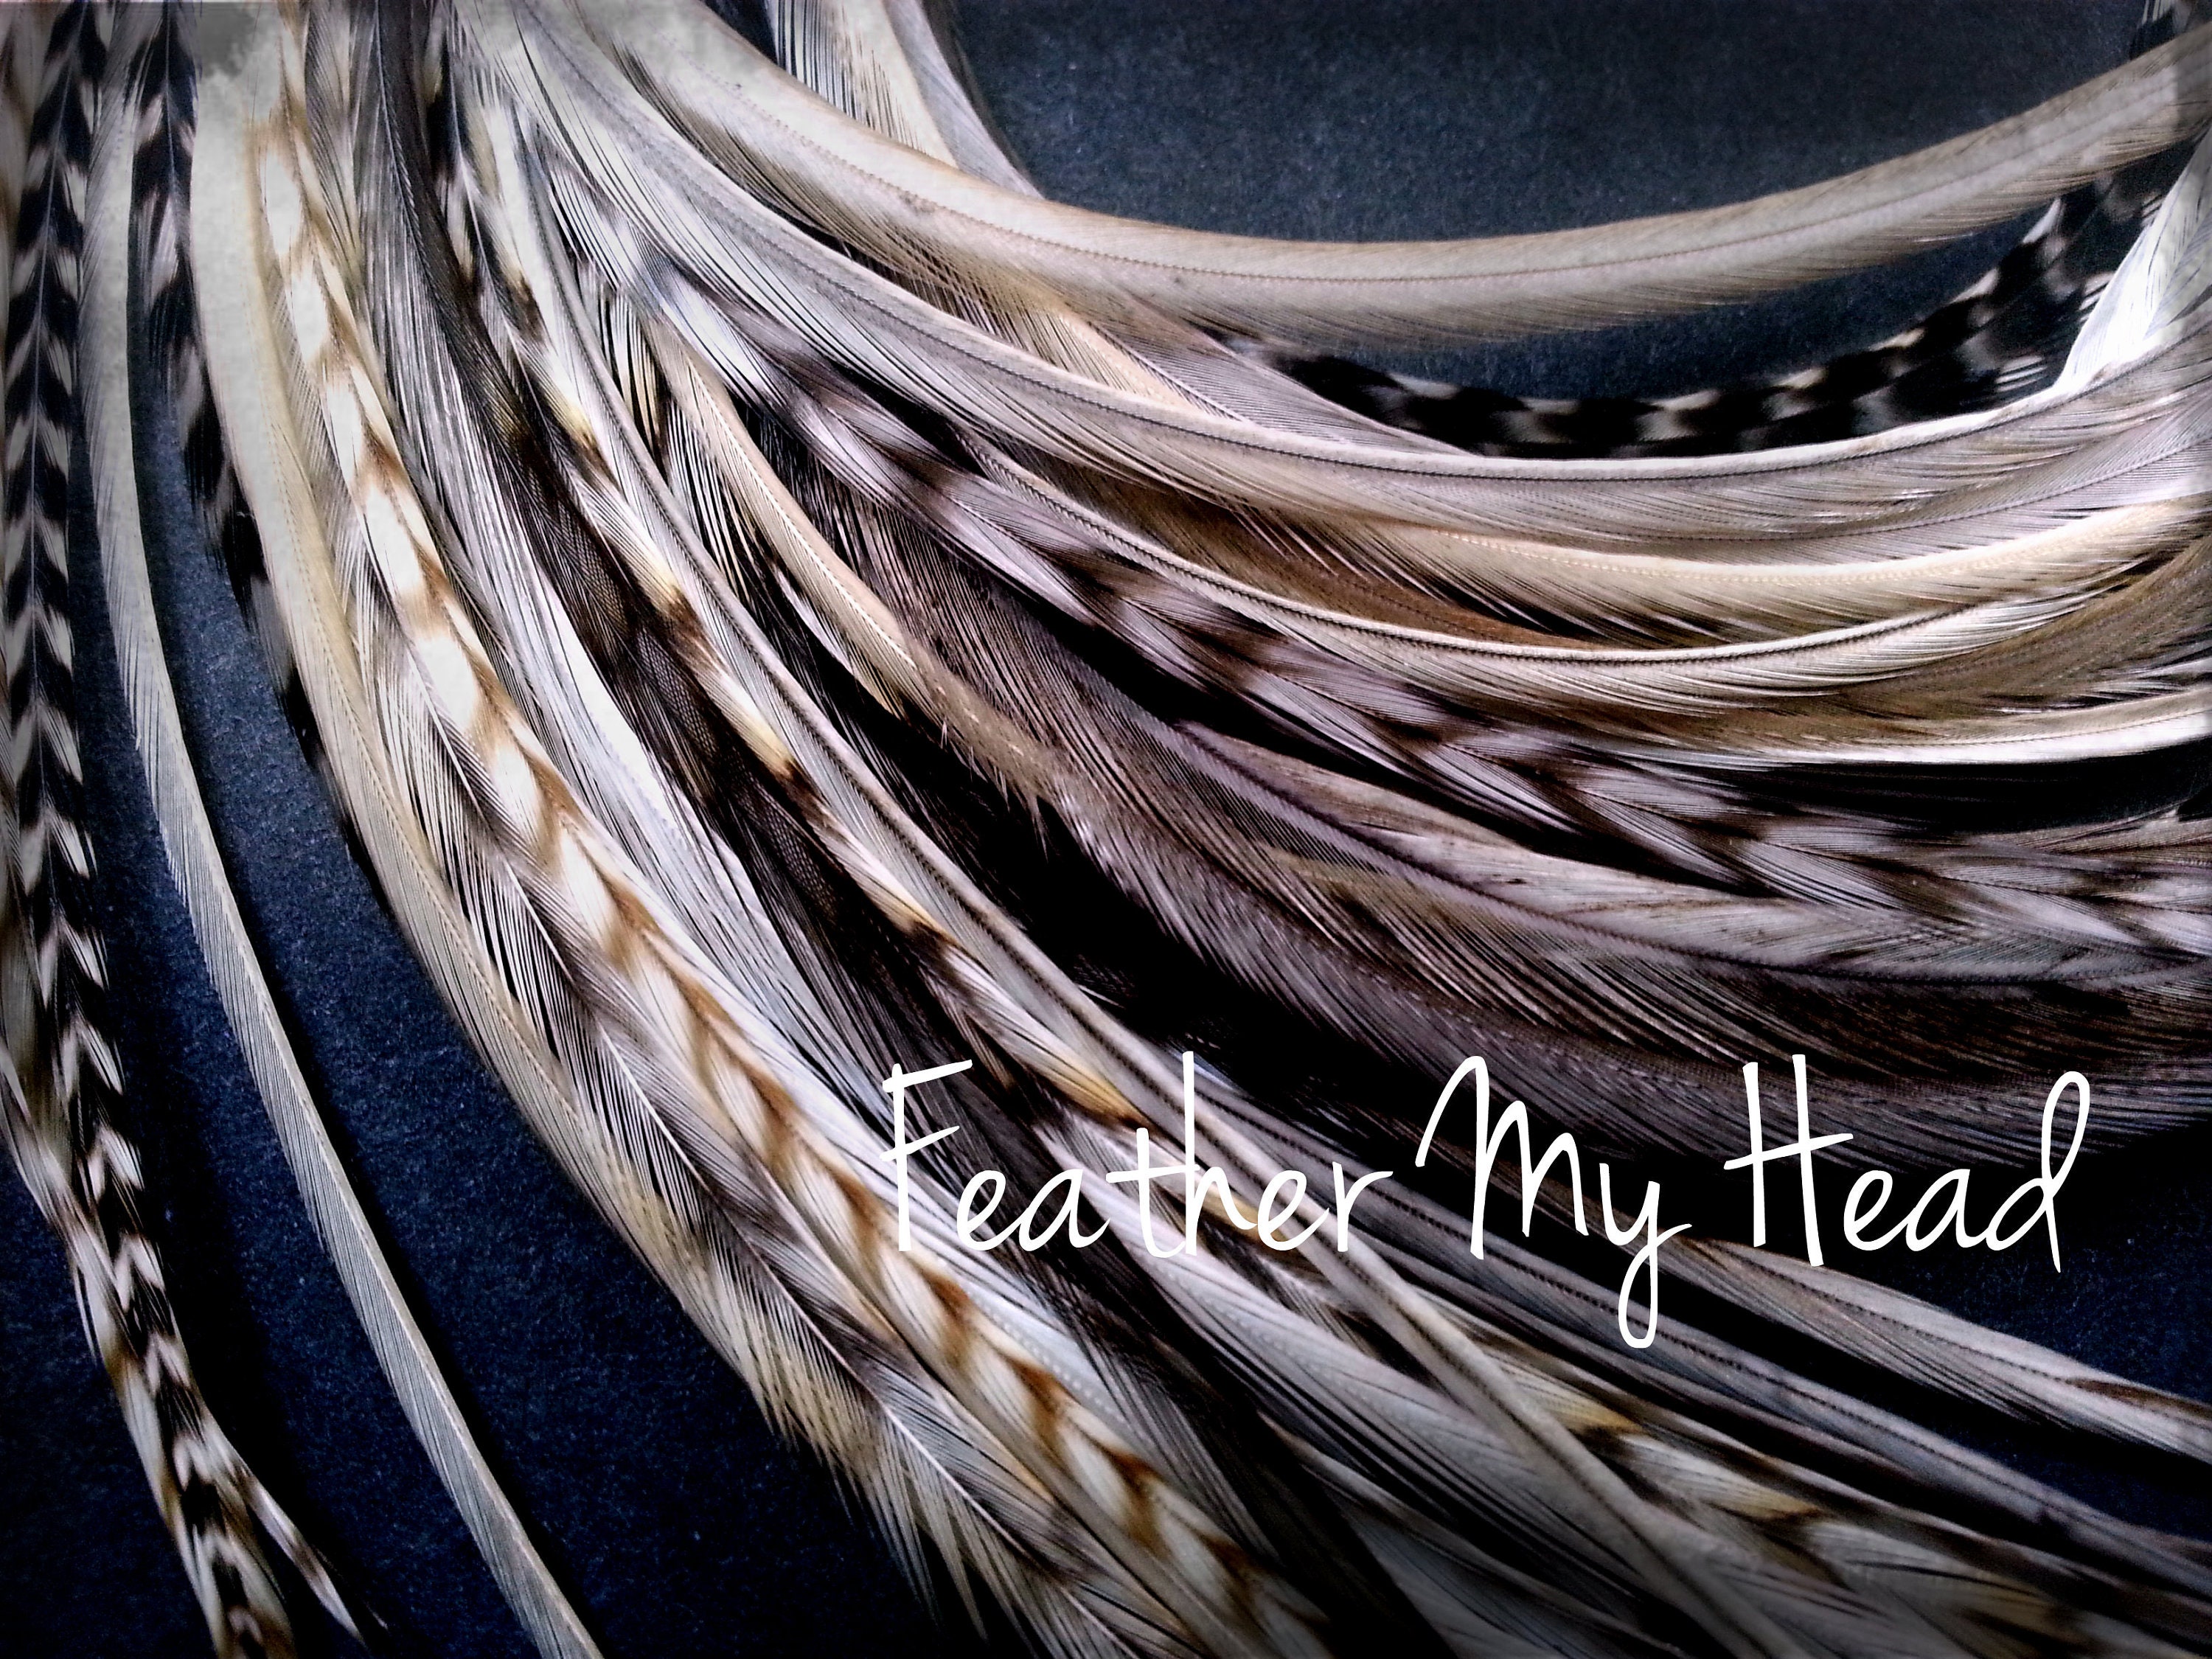 16 Pc Feathers Pick Your Legth Up To 16 In Long Optional DIY Kit